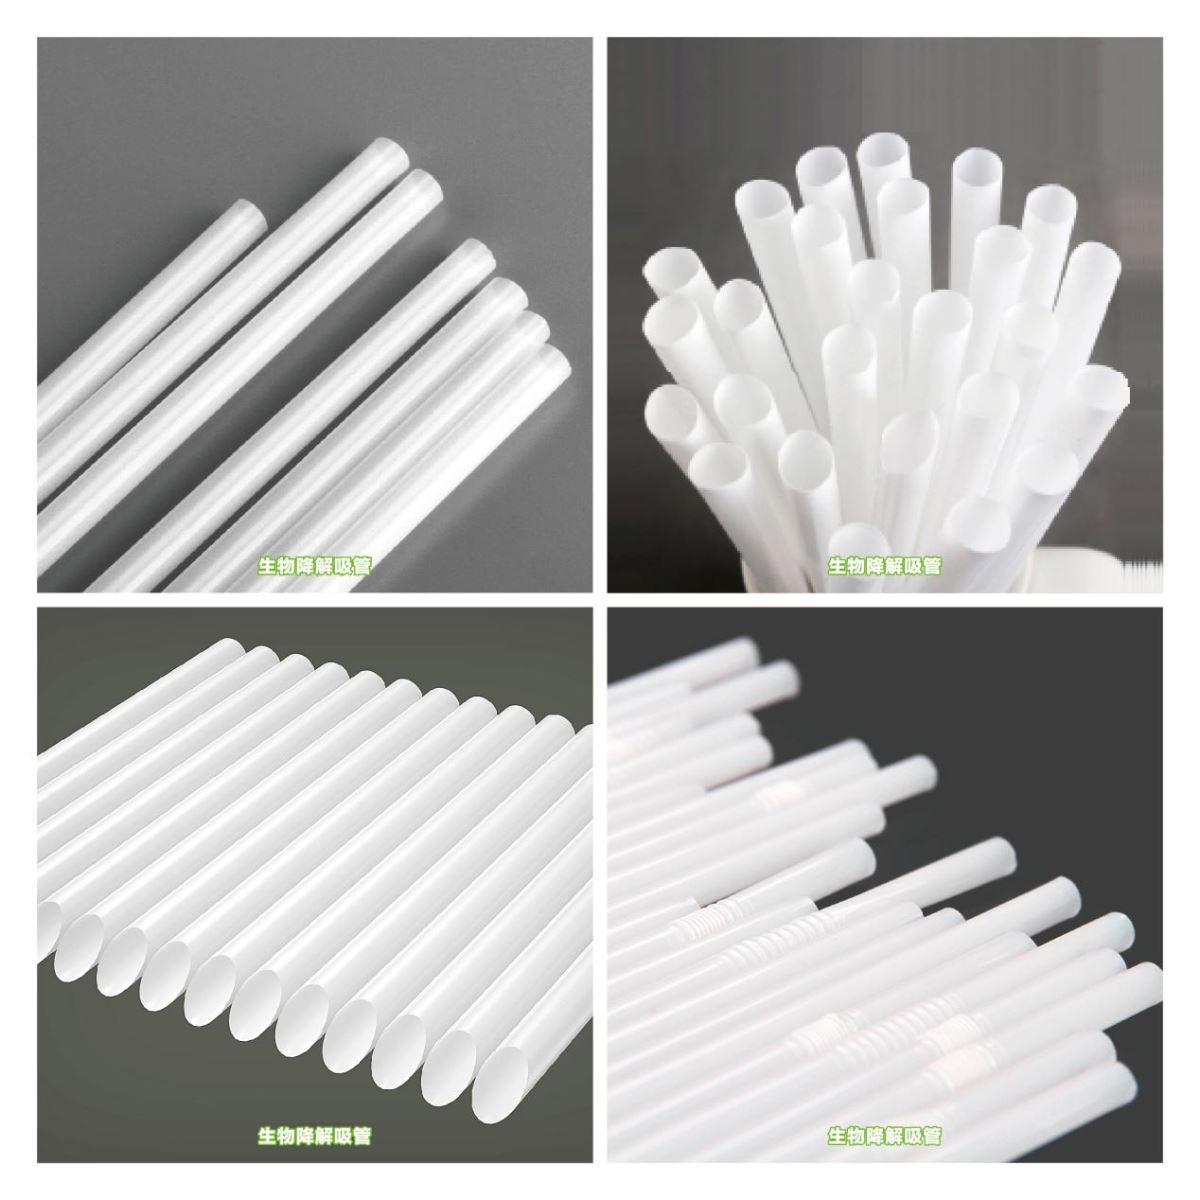 Biodegradable Straw materials and products